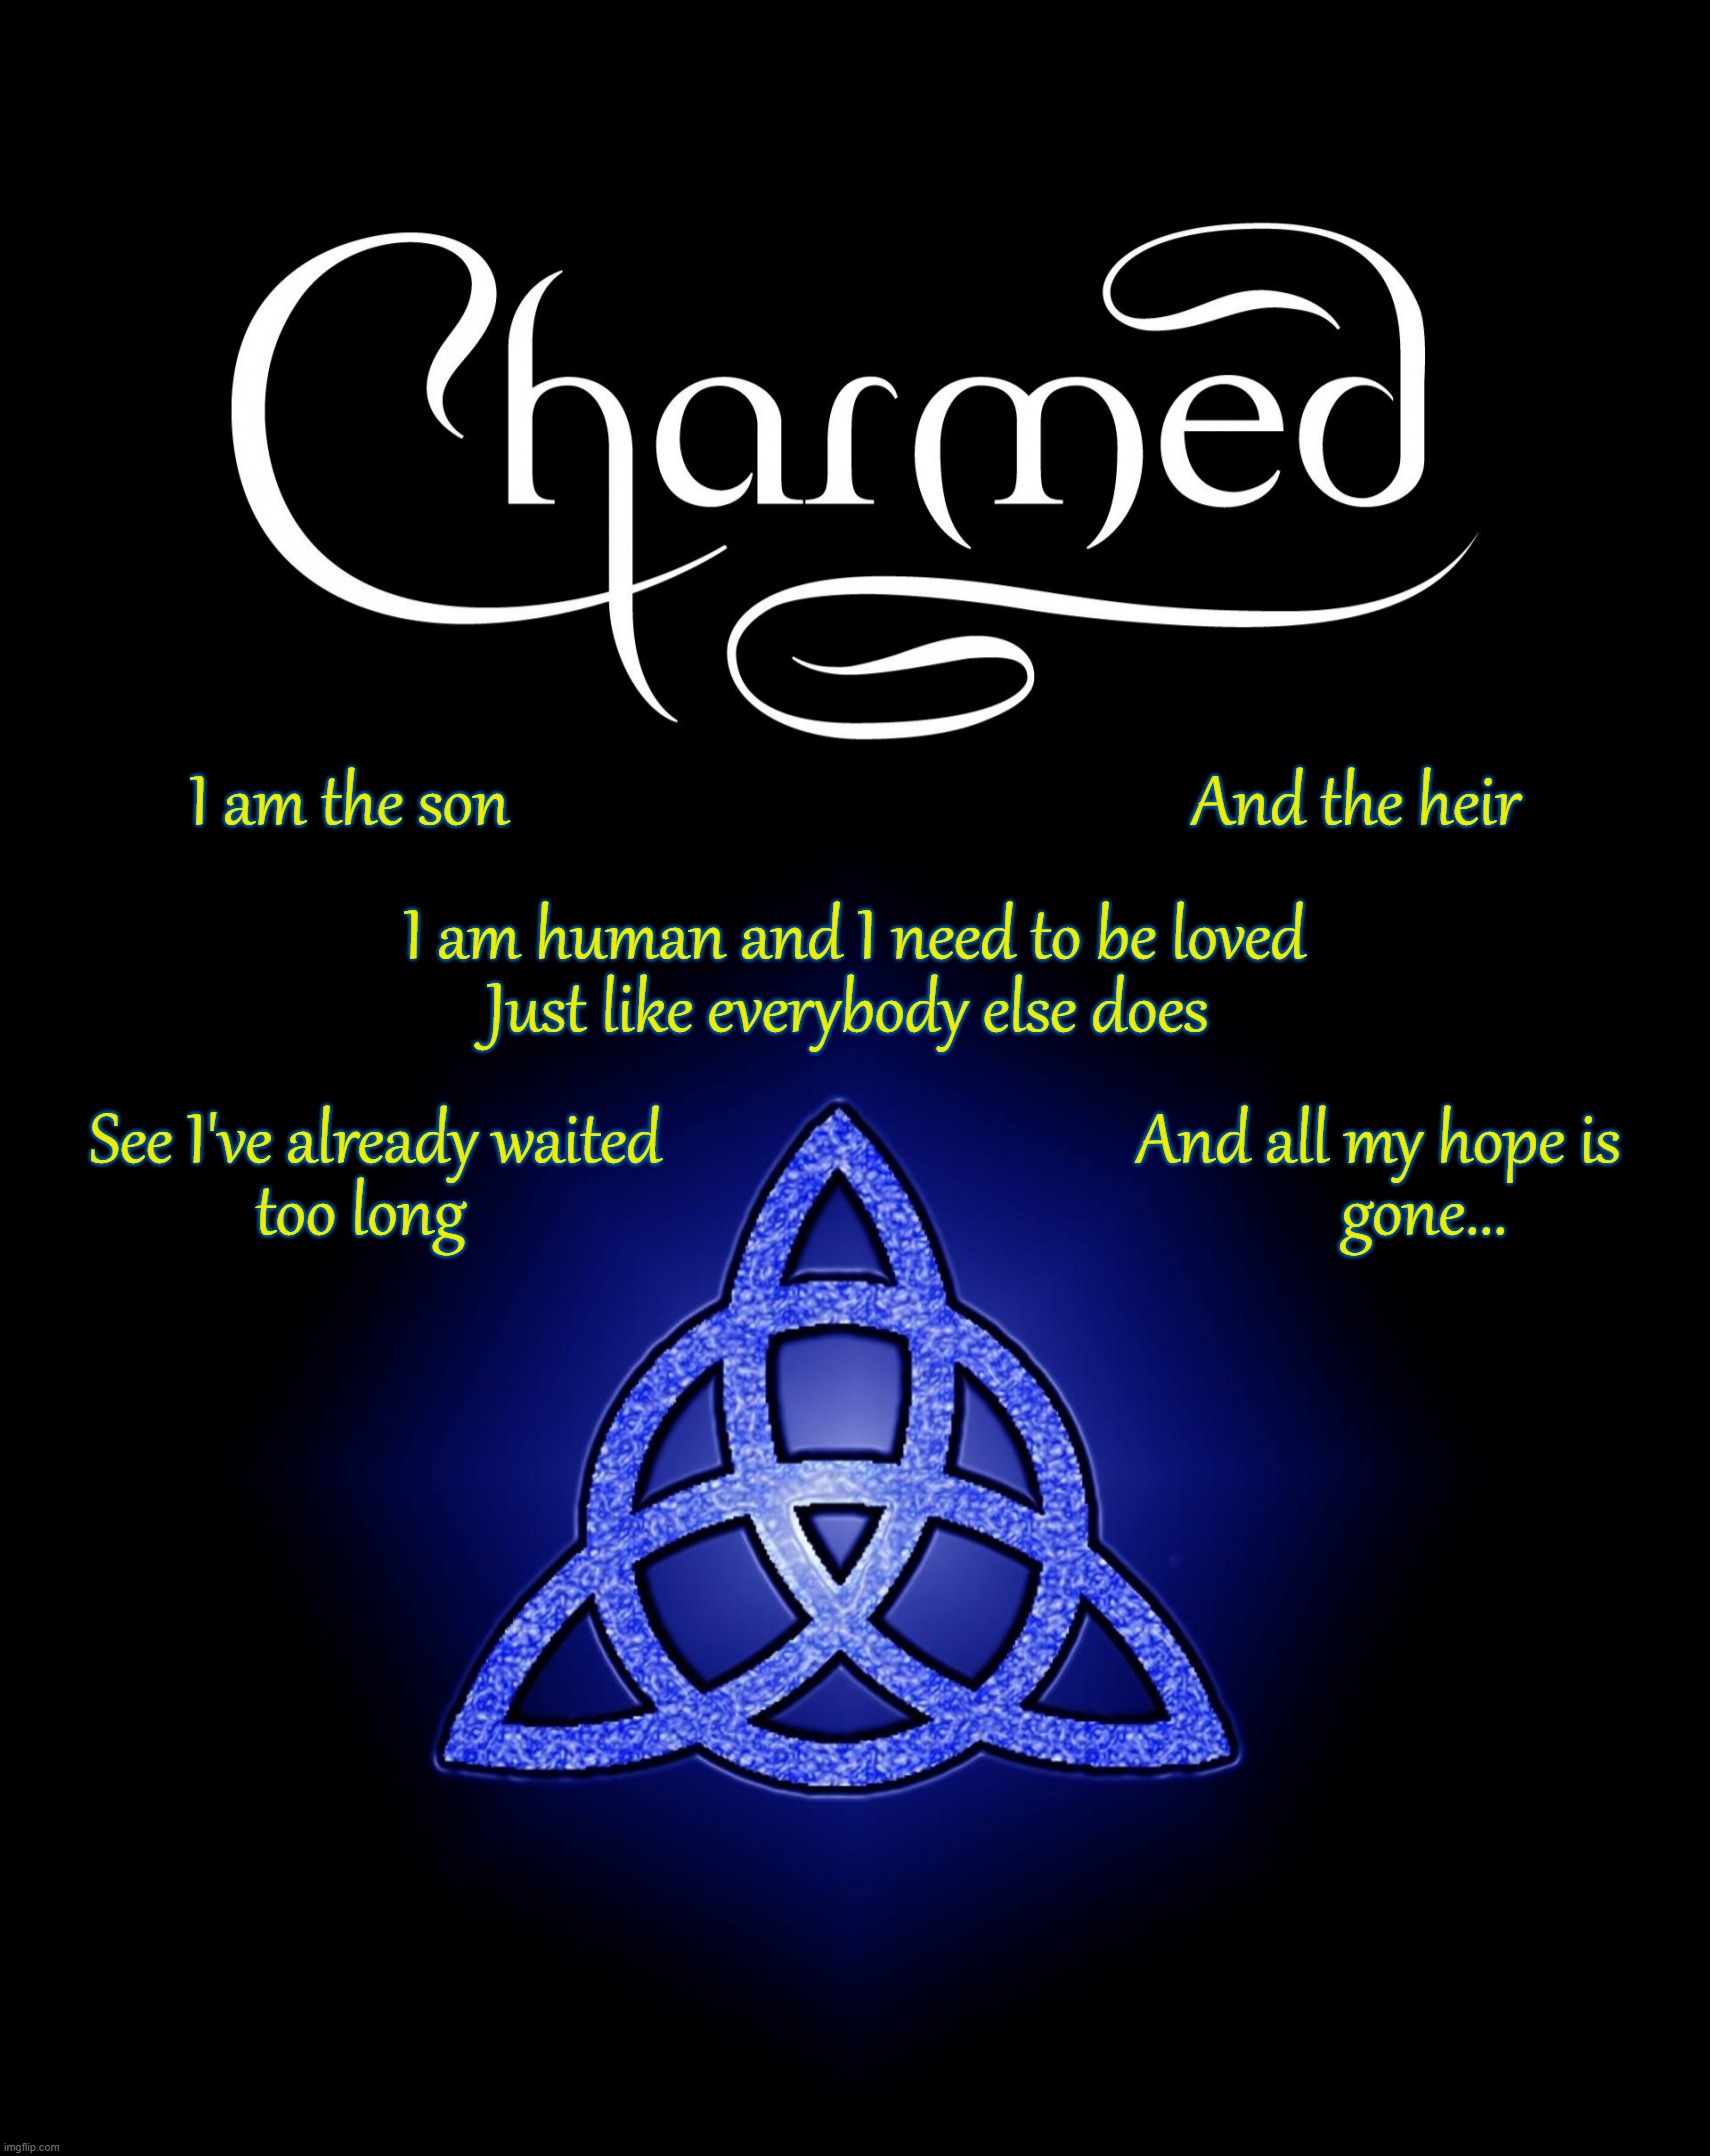 Charmed with theme lyrics | I am the son                                              And the heir; I am human and I need to be loved; Just like everybody else does; See I've already waited                                And all my hope is; too long                                                           gone... | image tagged in charmed,tv shows,witches,alyssa milano,theme song | made w/ Imgflip meme maker